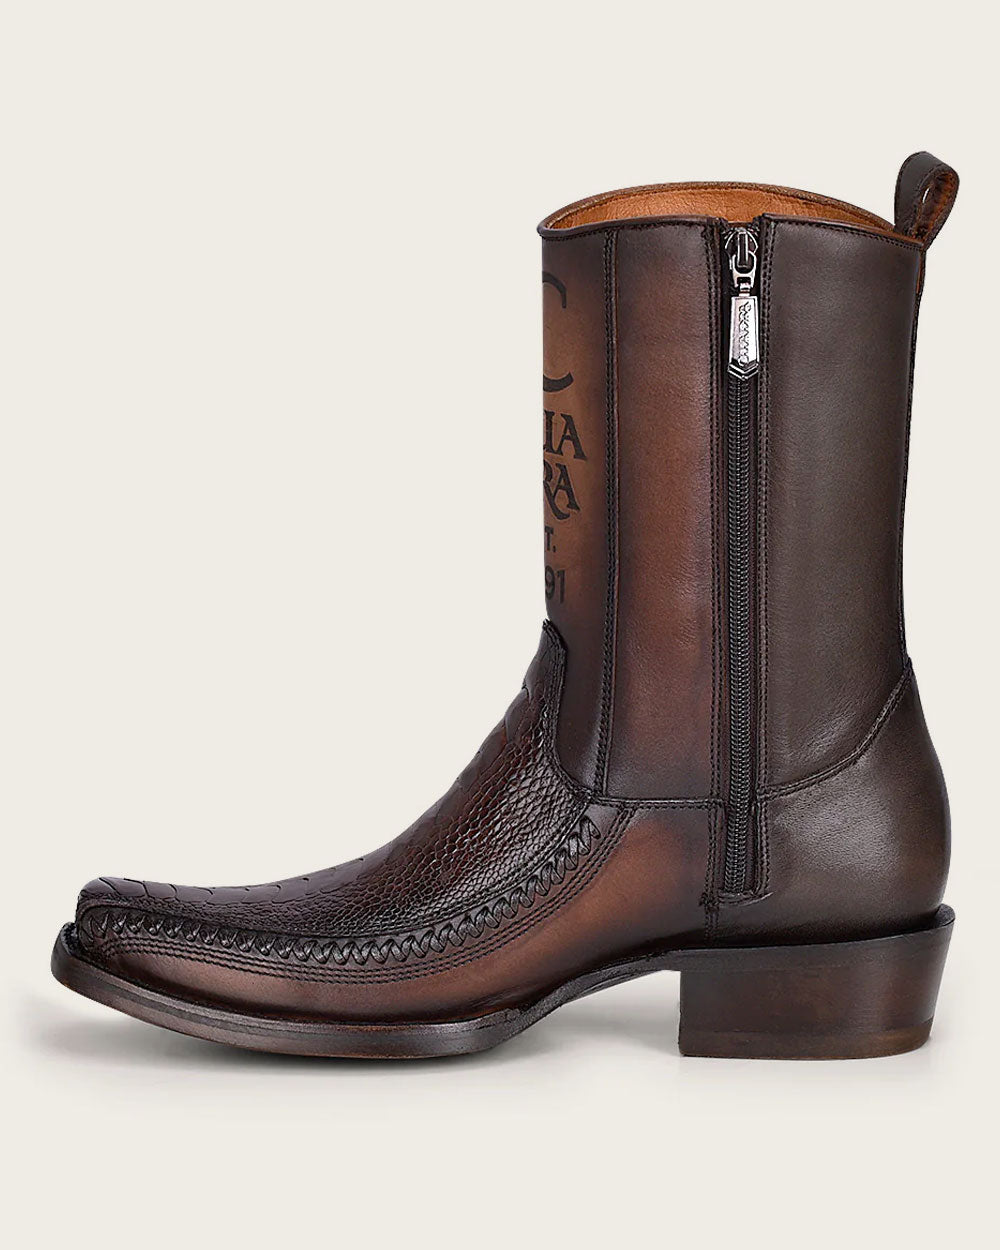 Internal Closure for Comfort: Easy on & off fit in Cuadra's traditional boots.